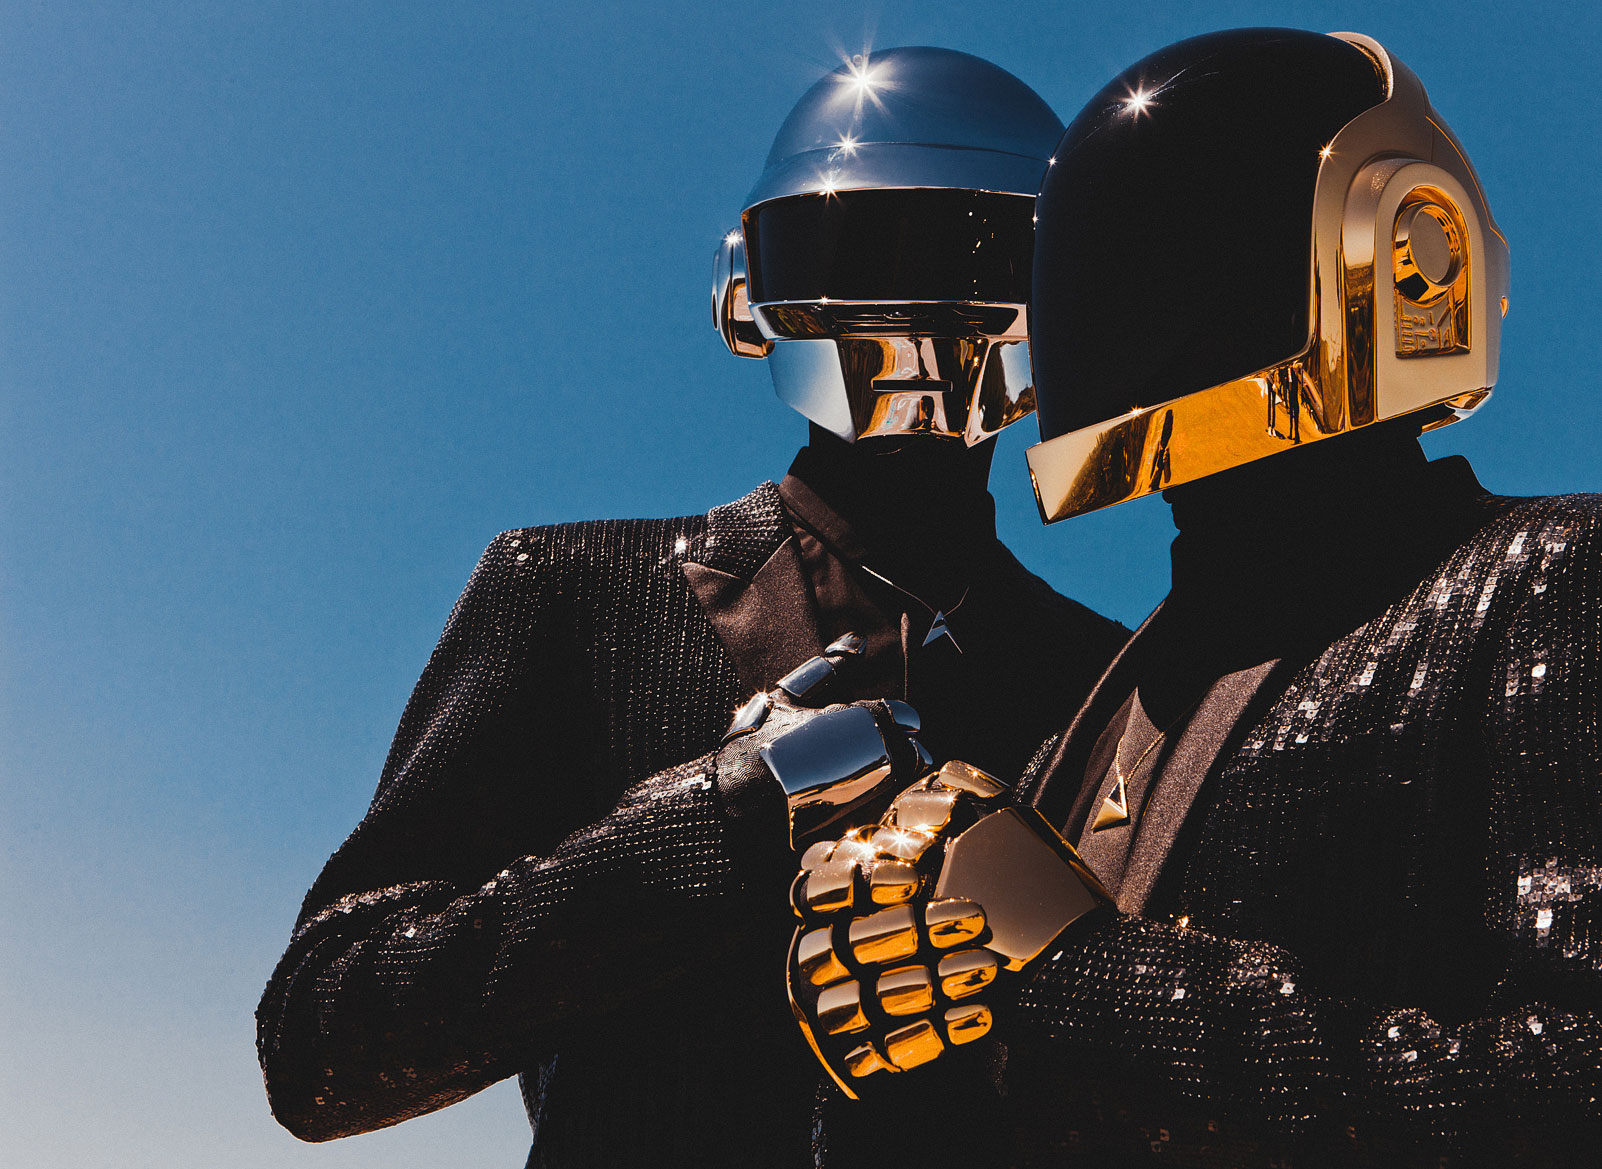 Daft Punk Wallpapers Music Hq Daft Punk Pictures 4k Wallpapers 2019